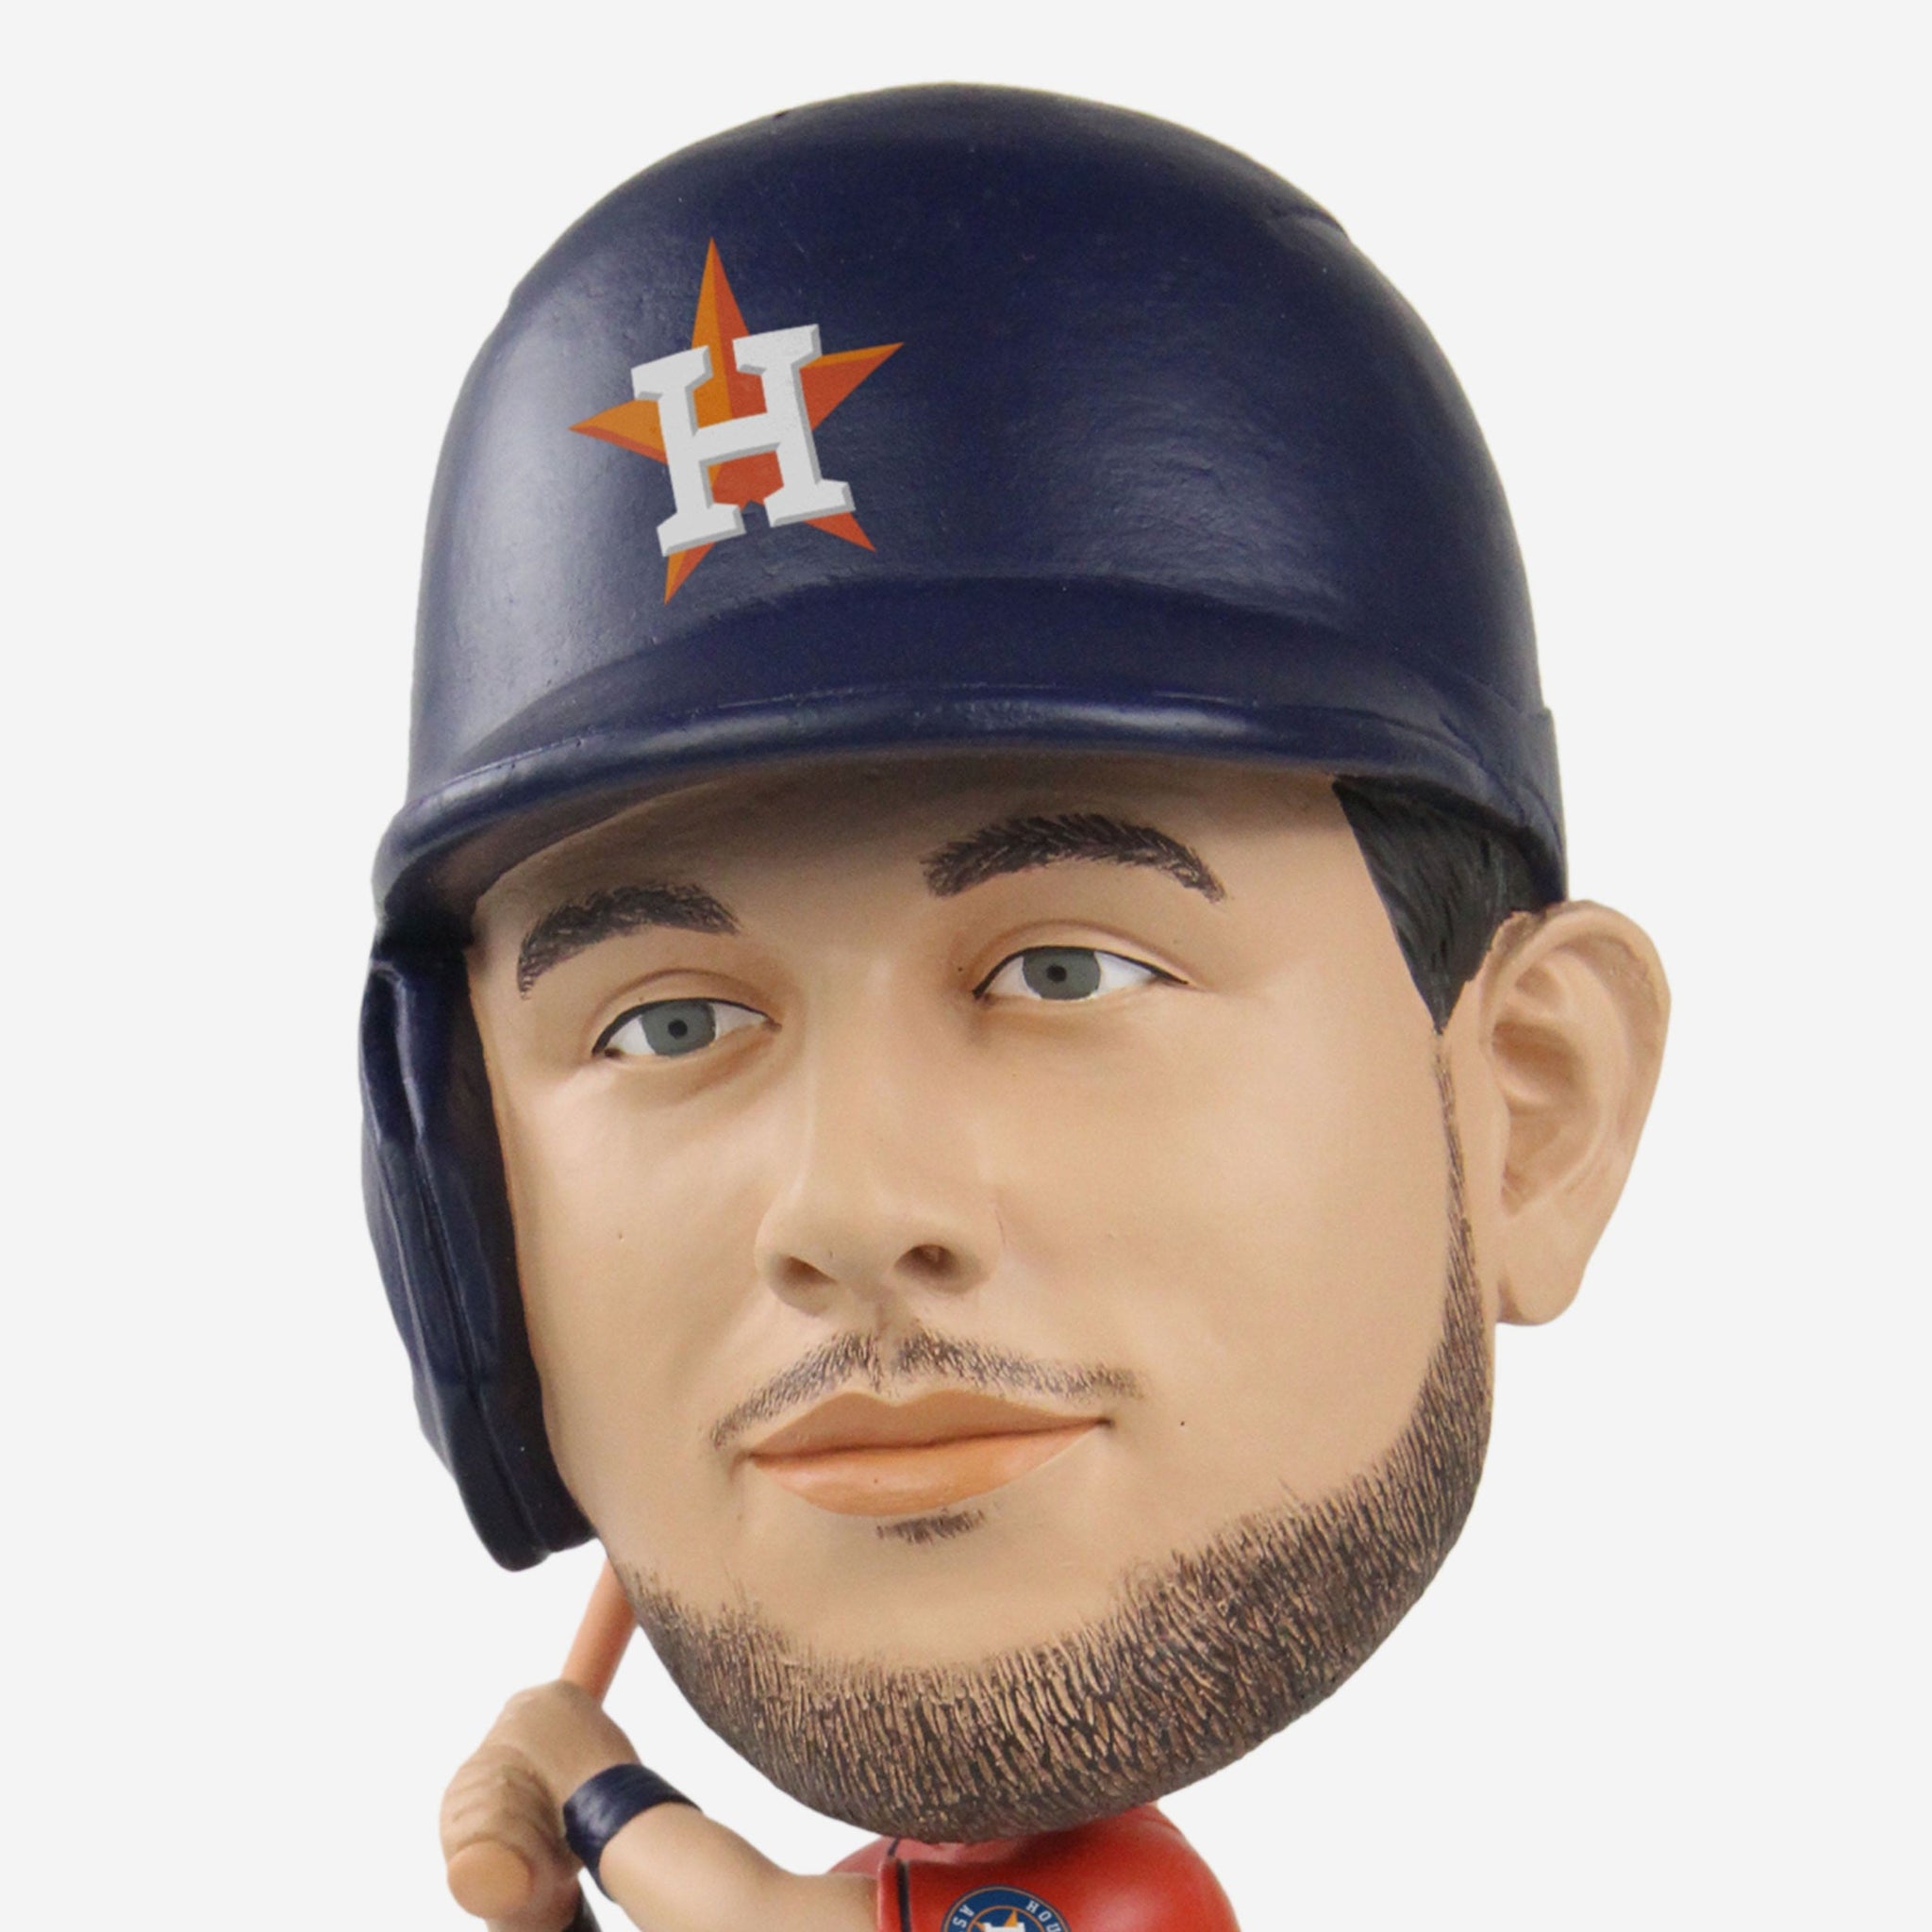 Houston Astros Kyle Tucker Space City Bobblehead of The Month May 2022